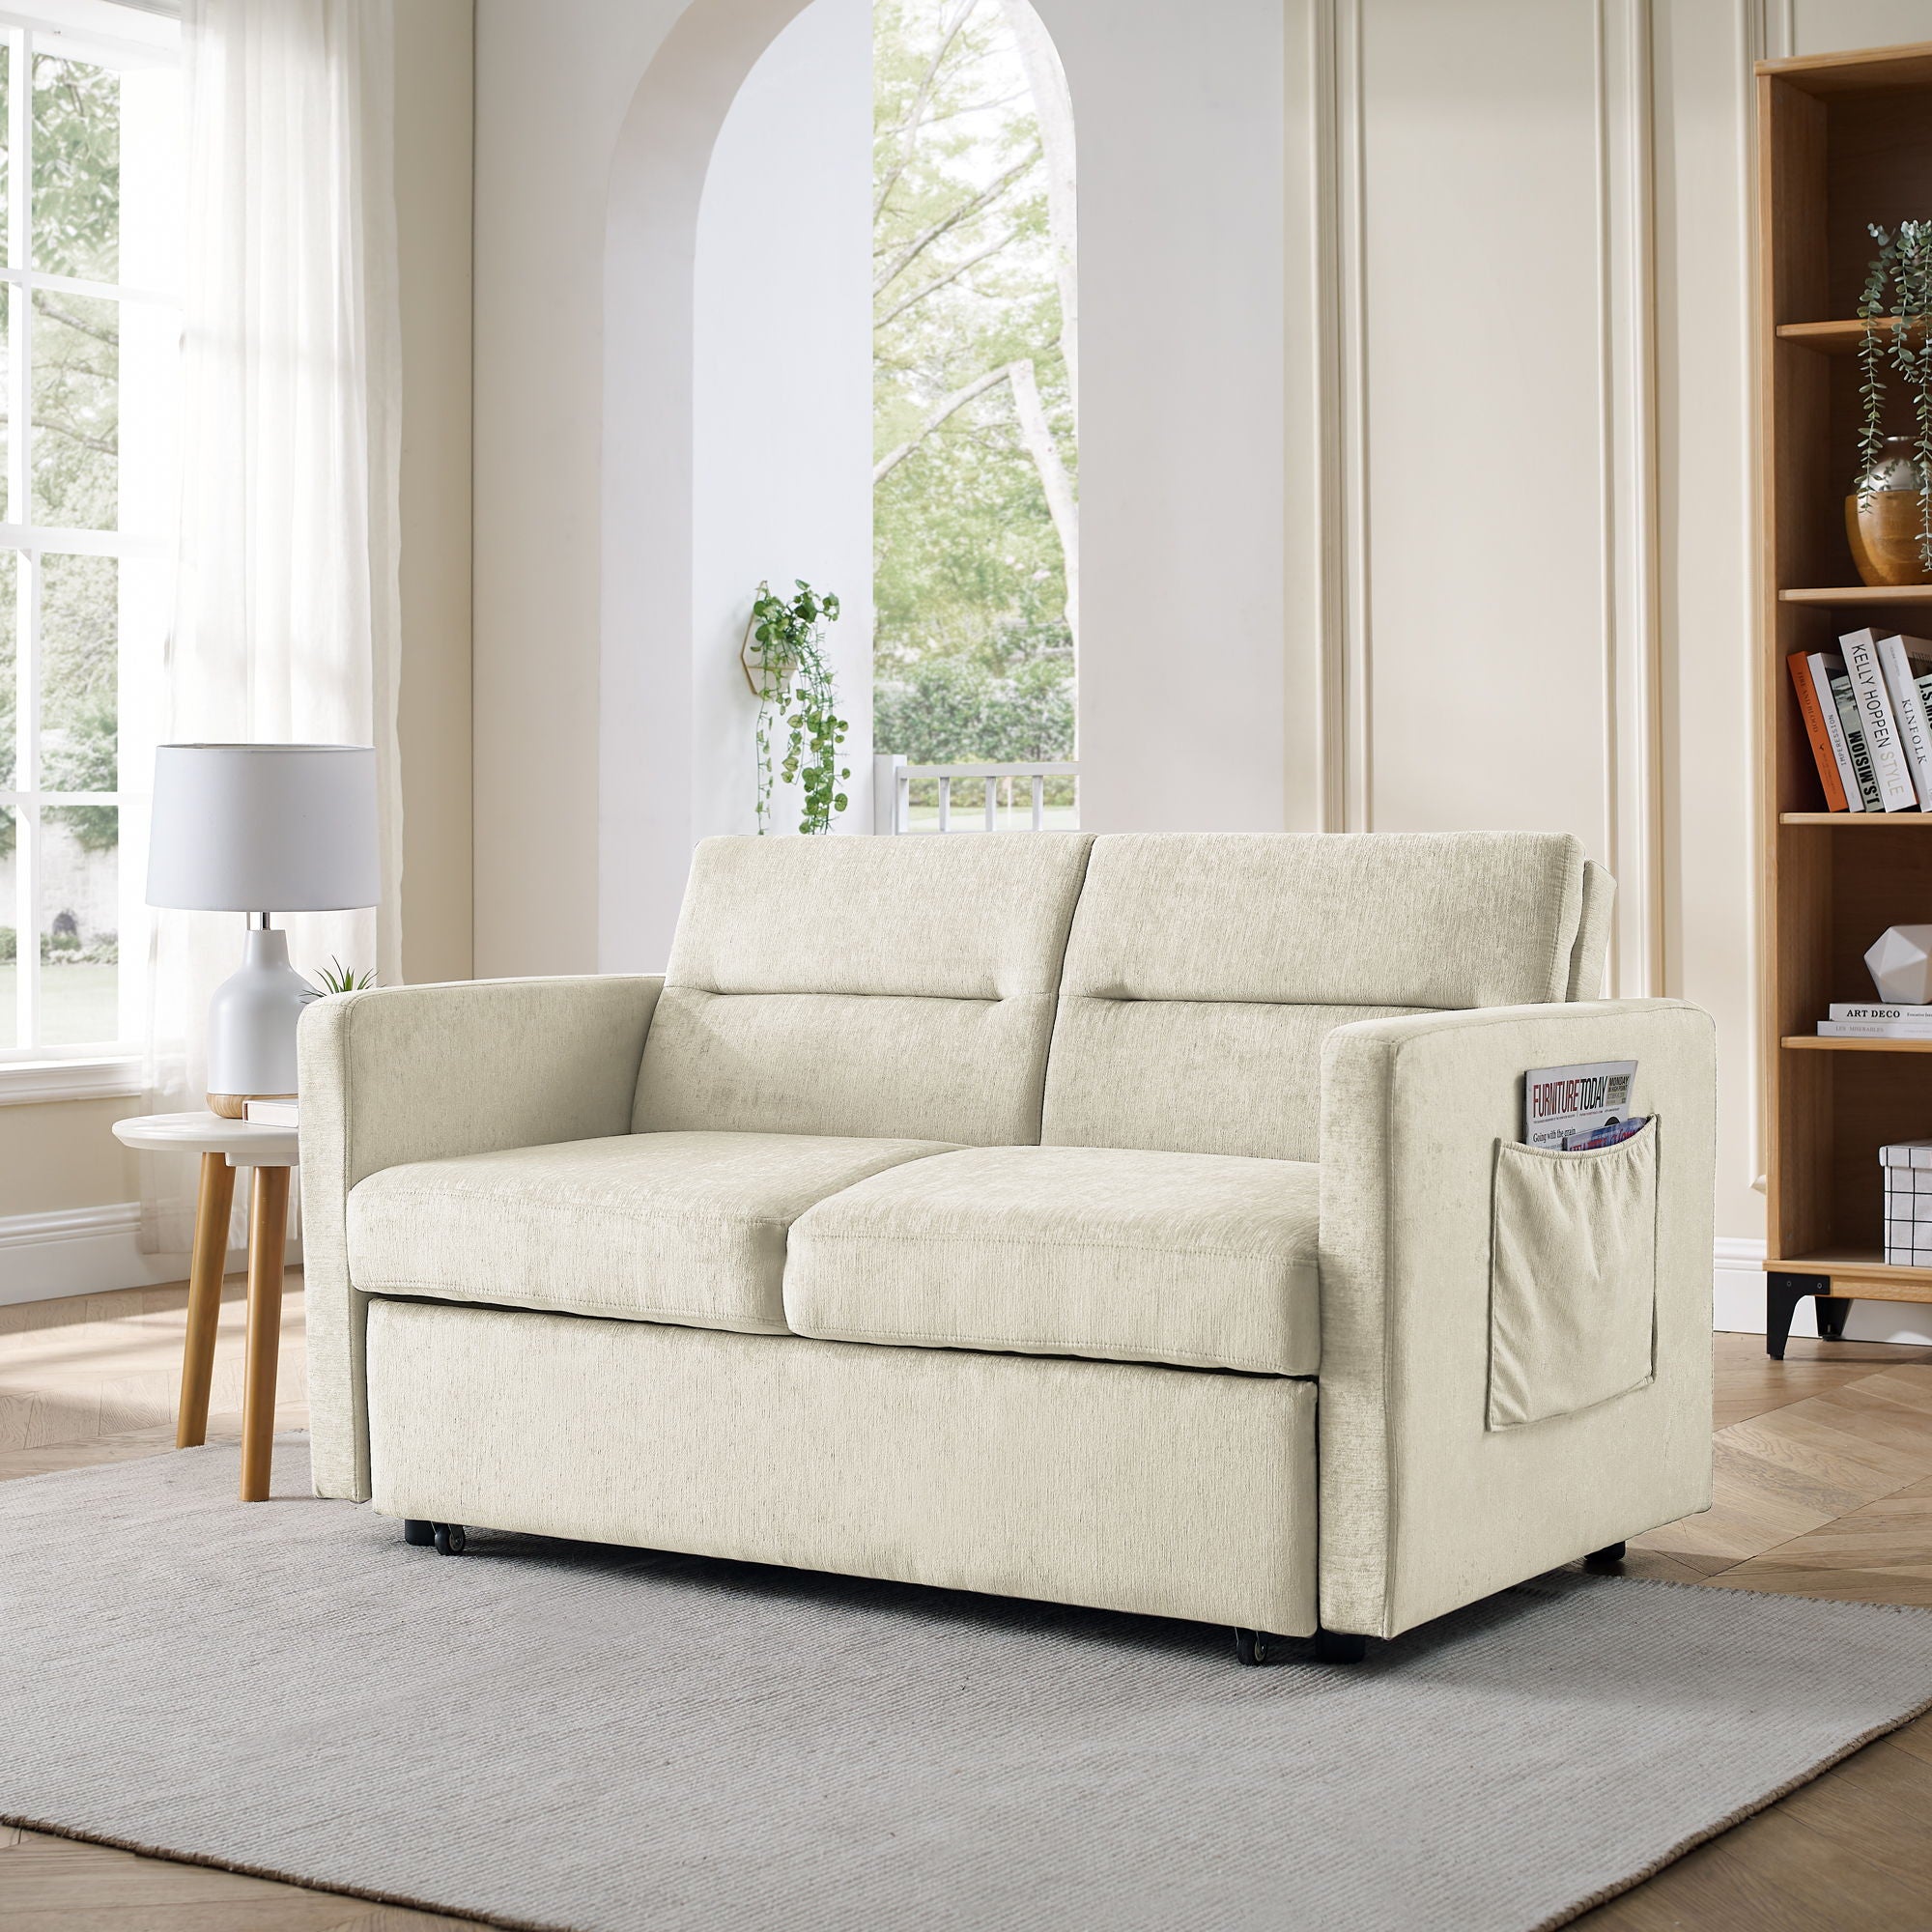 Loveseats Sofa Bed With Pull - Out Bed Adjsutable Back And Two Arm Pocket - Beige